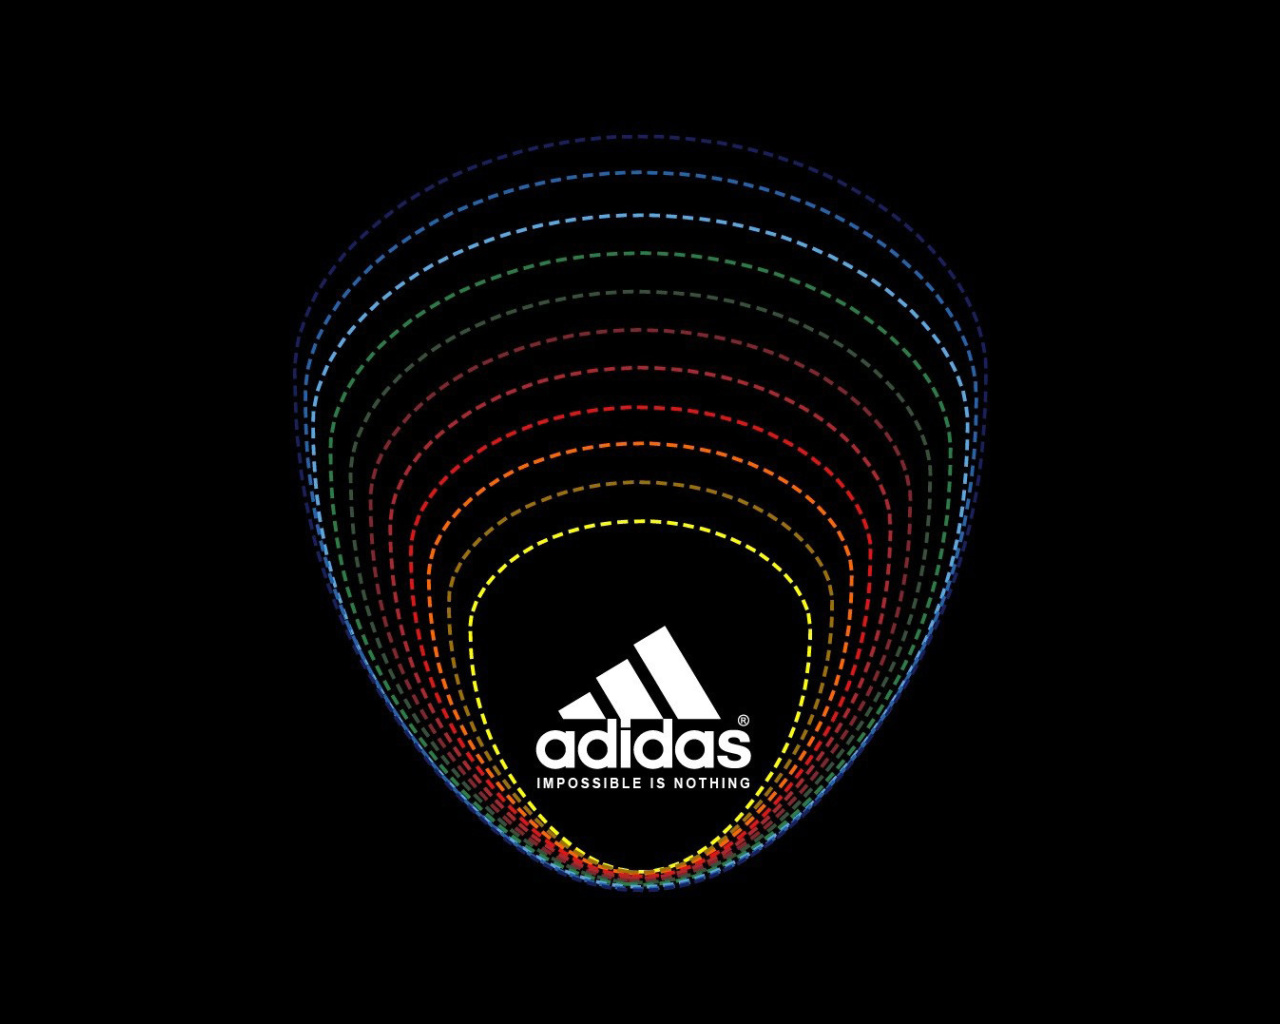 Das Adidas Tagline, Impossible is Nothing Wallpaper 1280x1024